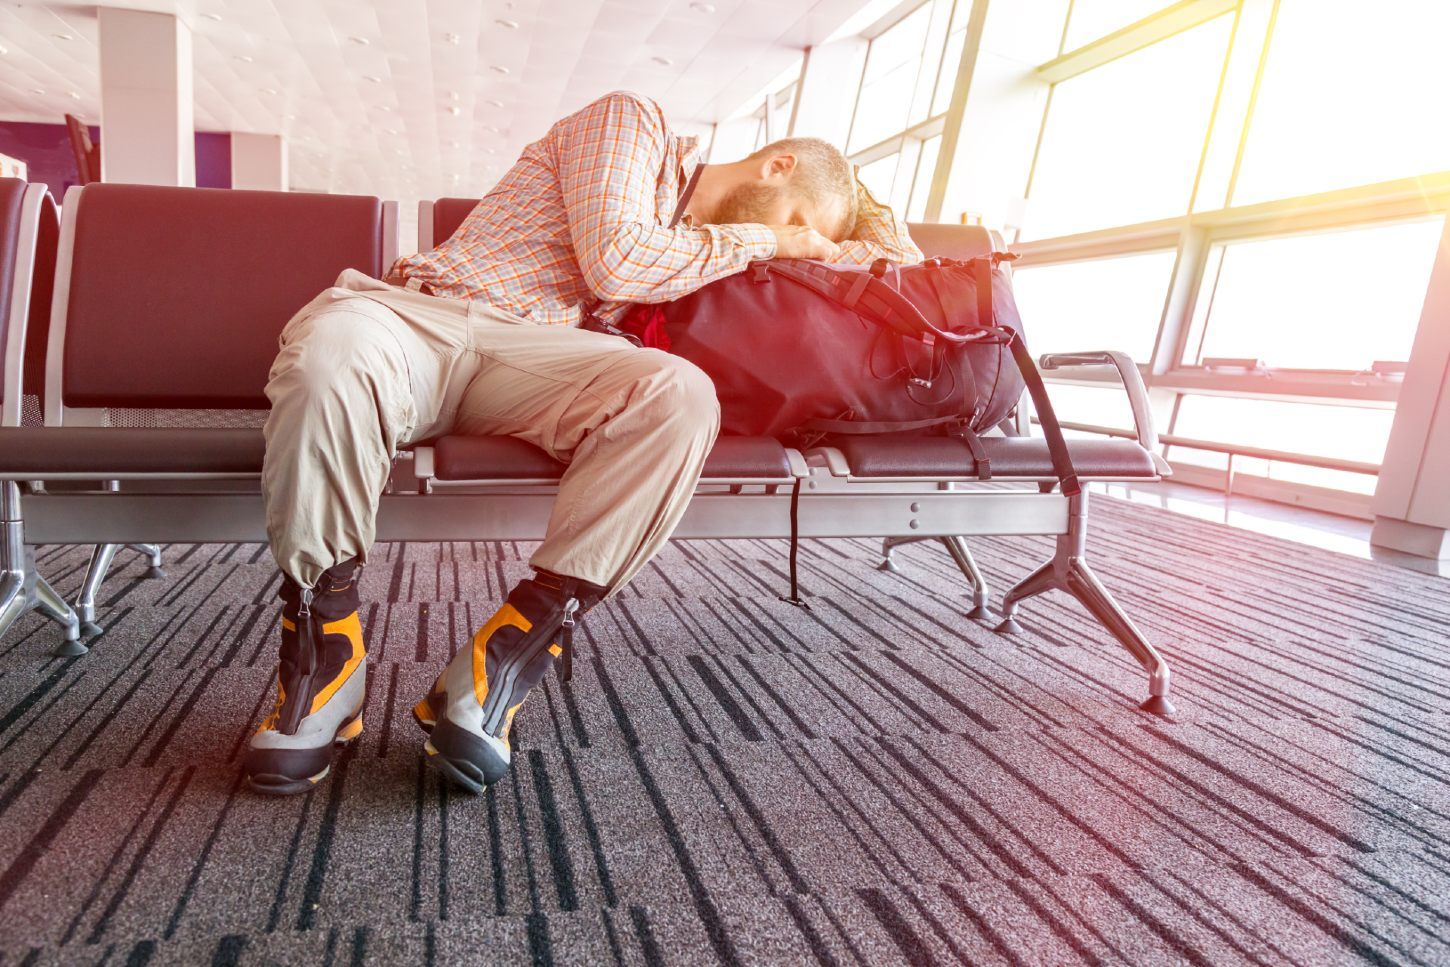 Man sleeping in seat at airport gate - cancelled flight